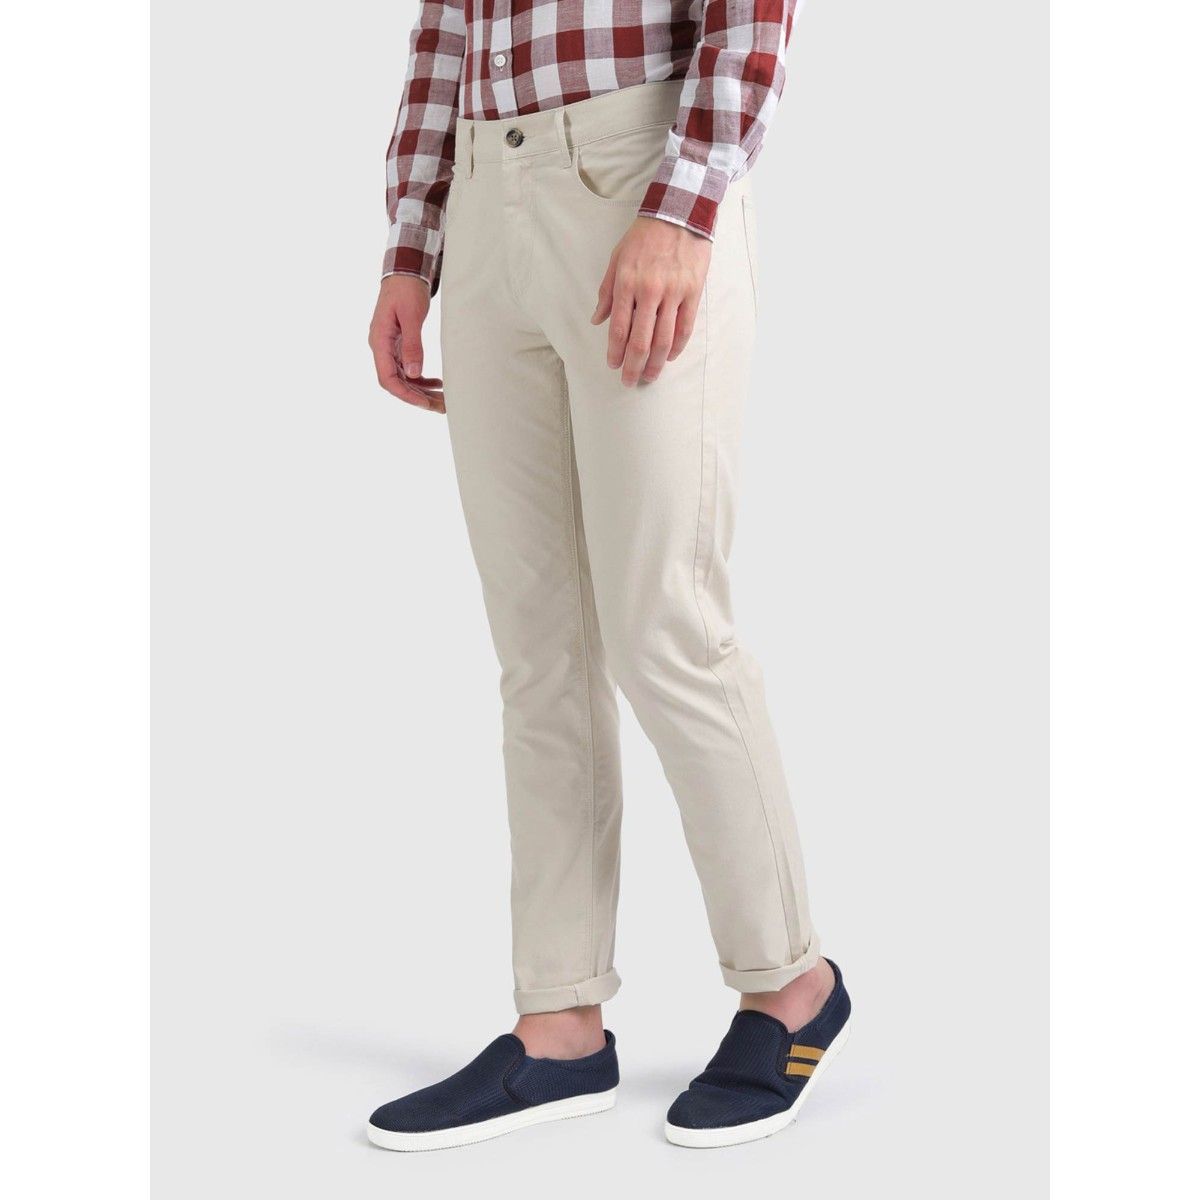 United Colors Of Benetton Solid Trousers Buy United Colors Of Benetton  Solid Trousers Online at Best Price in India  NykaaMan